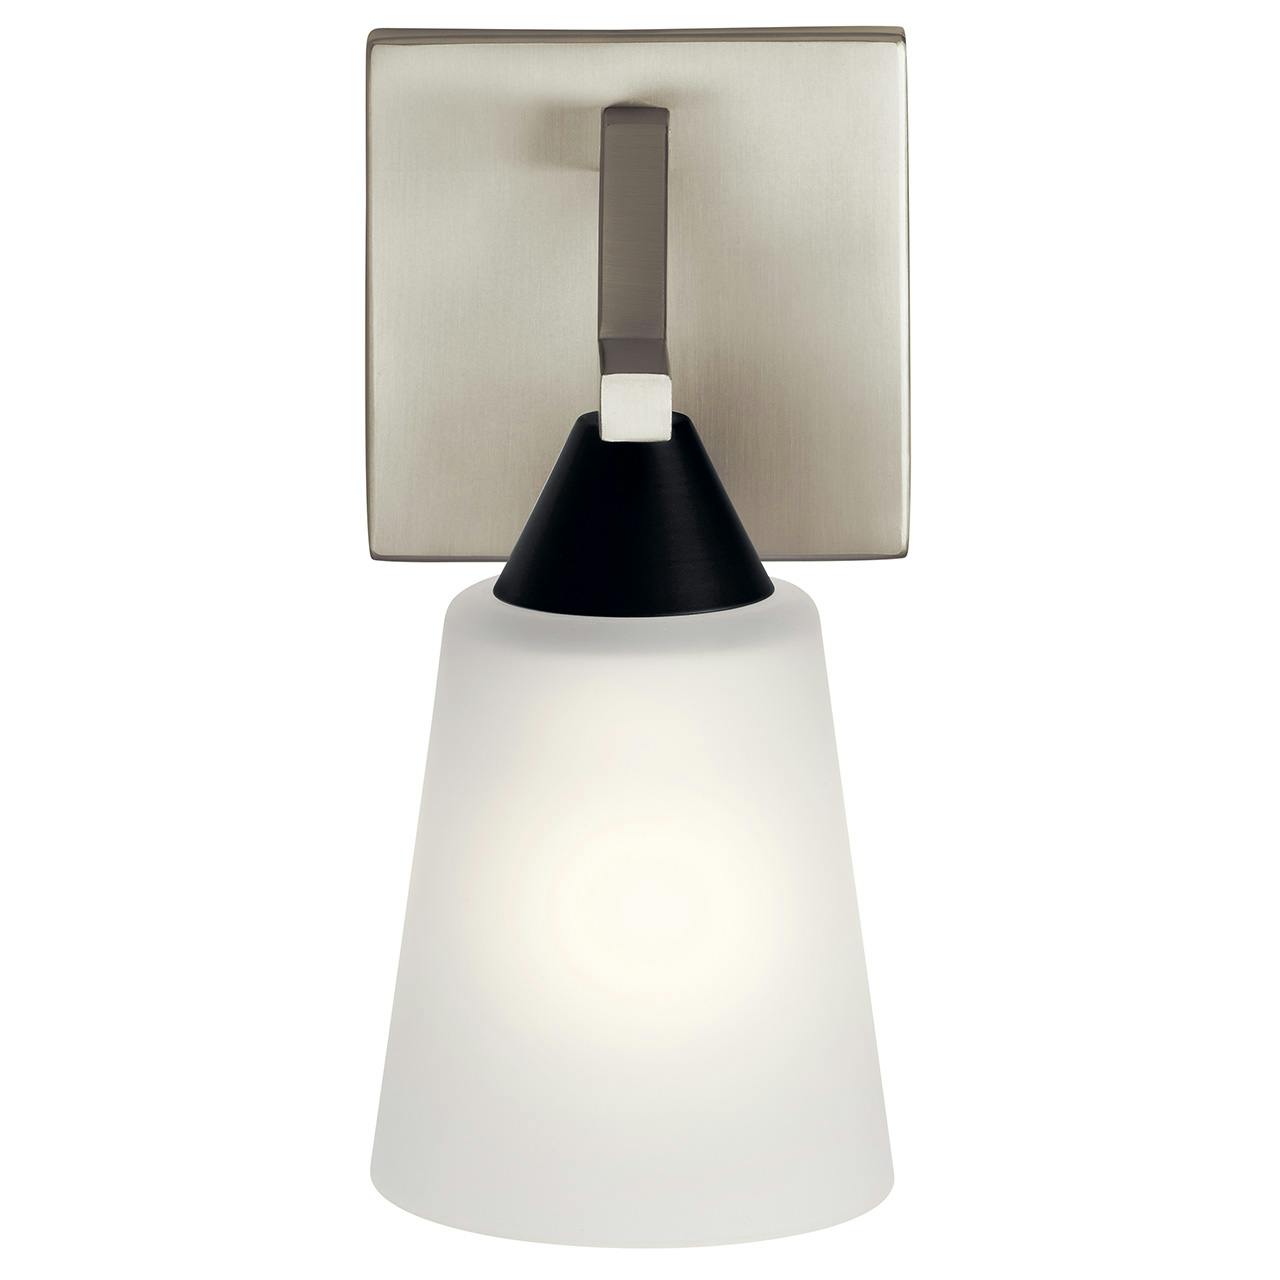 The Skagos 1 Light Wall Sconce Brushed Nickel facing down on a white background